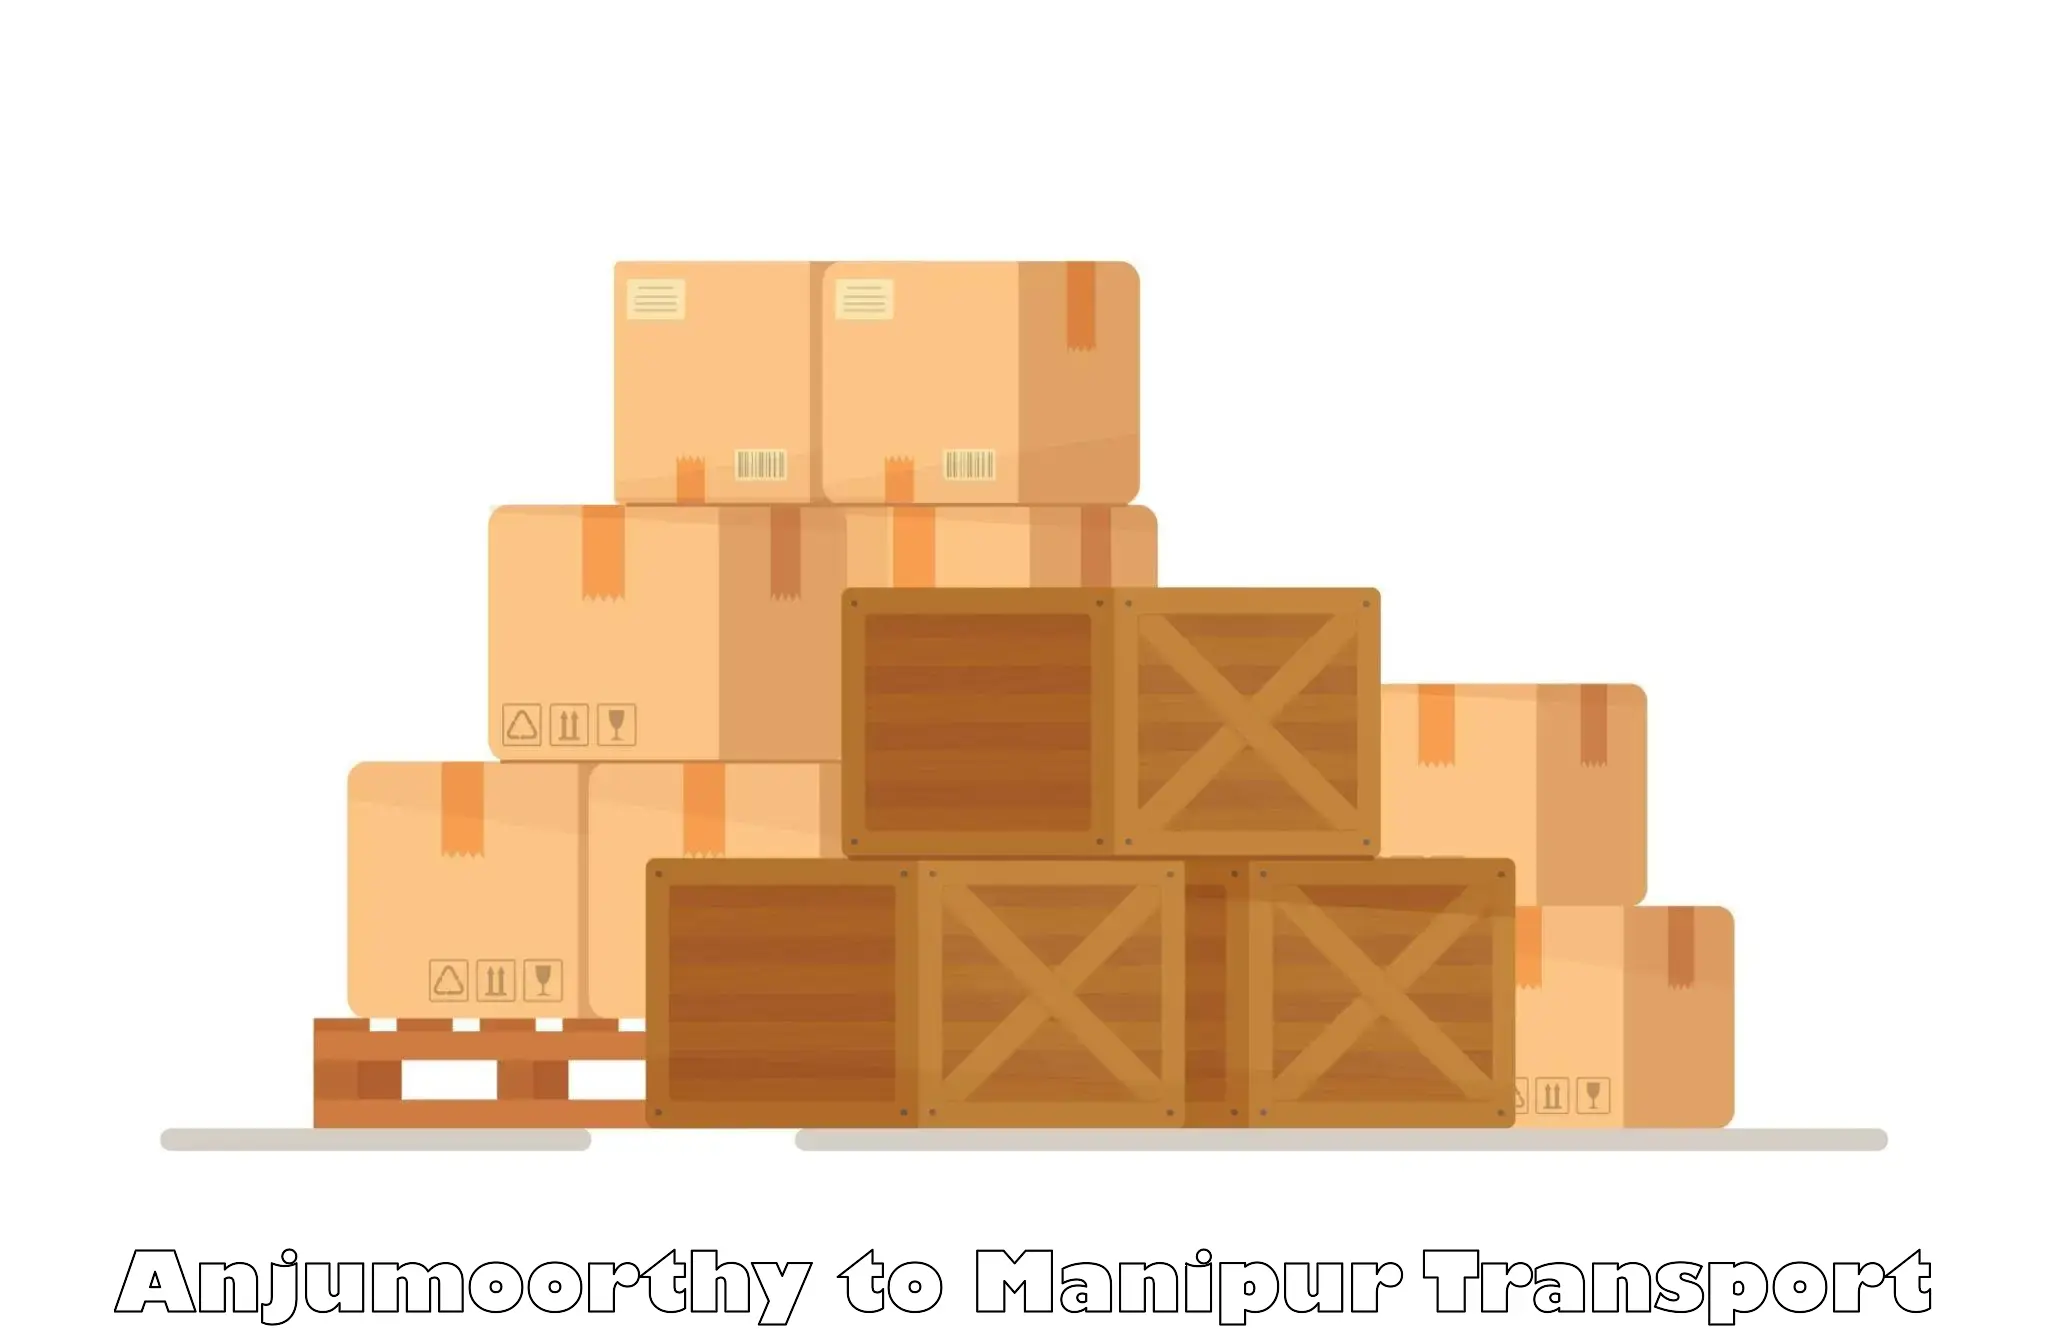 Container transport service Anjumoorthy to Moirang